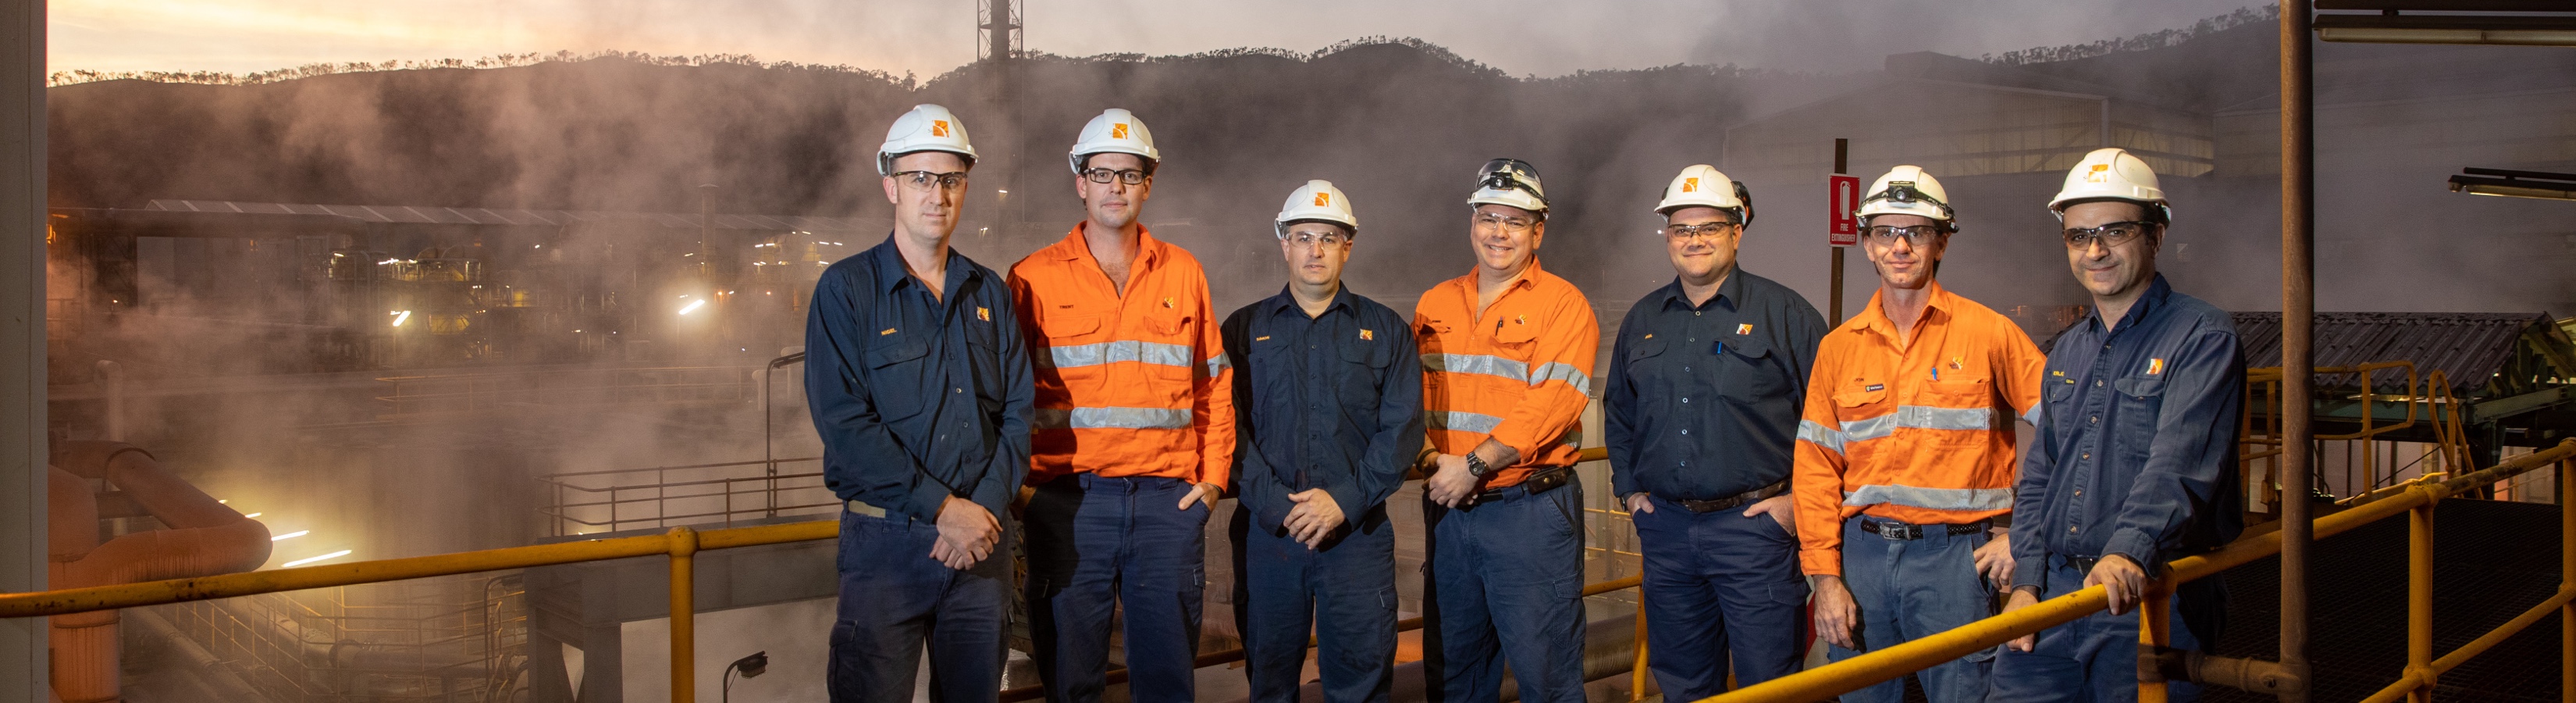 Queensland zinc producer makes $17 million investment in CopperString 2.0